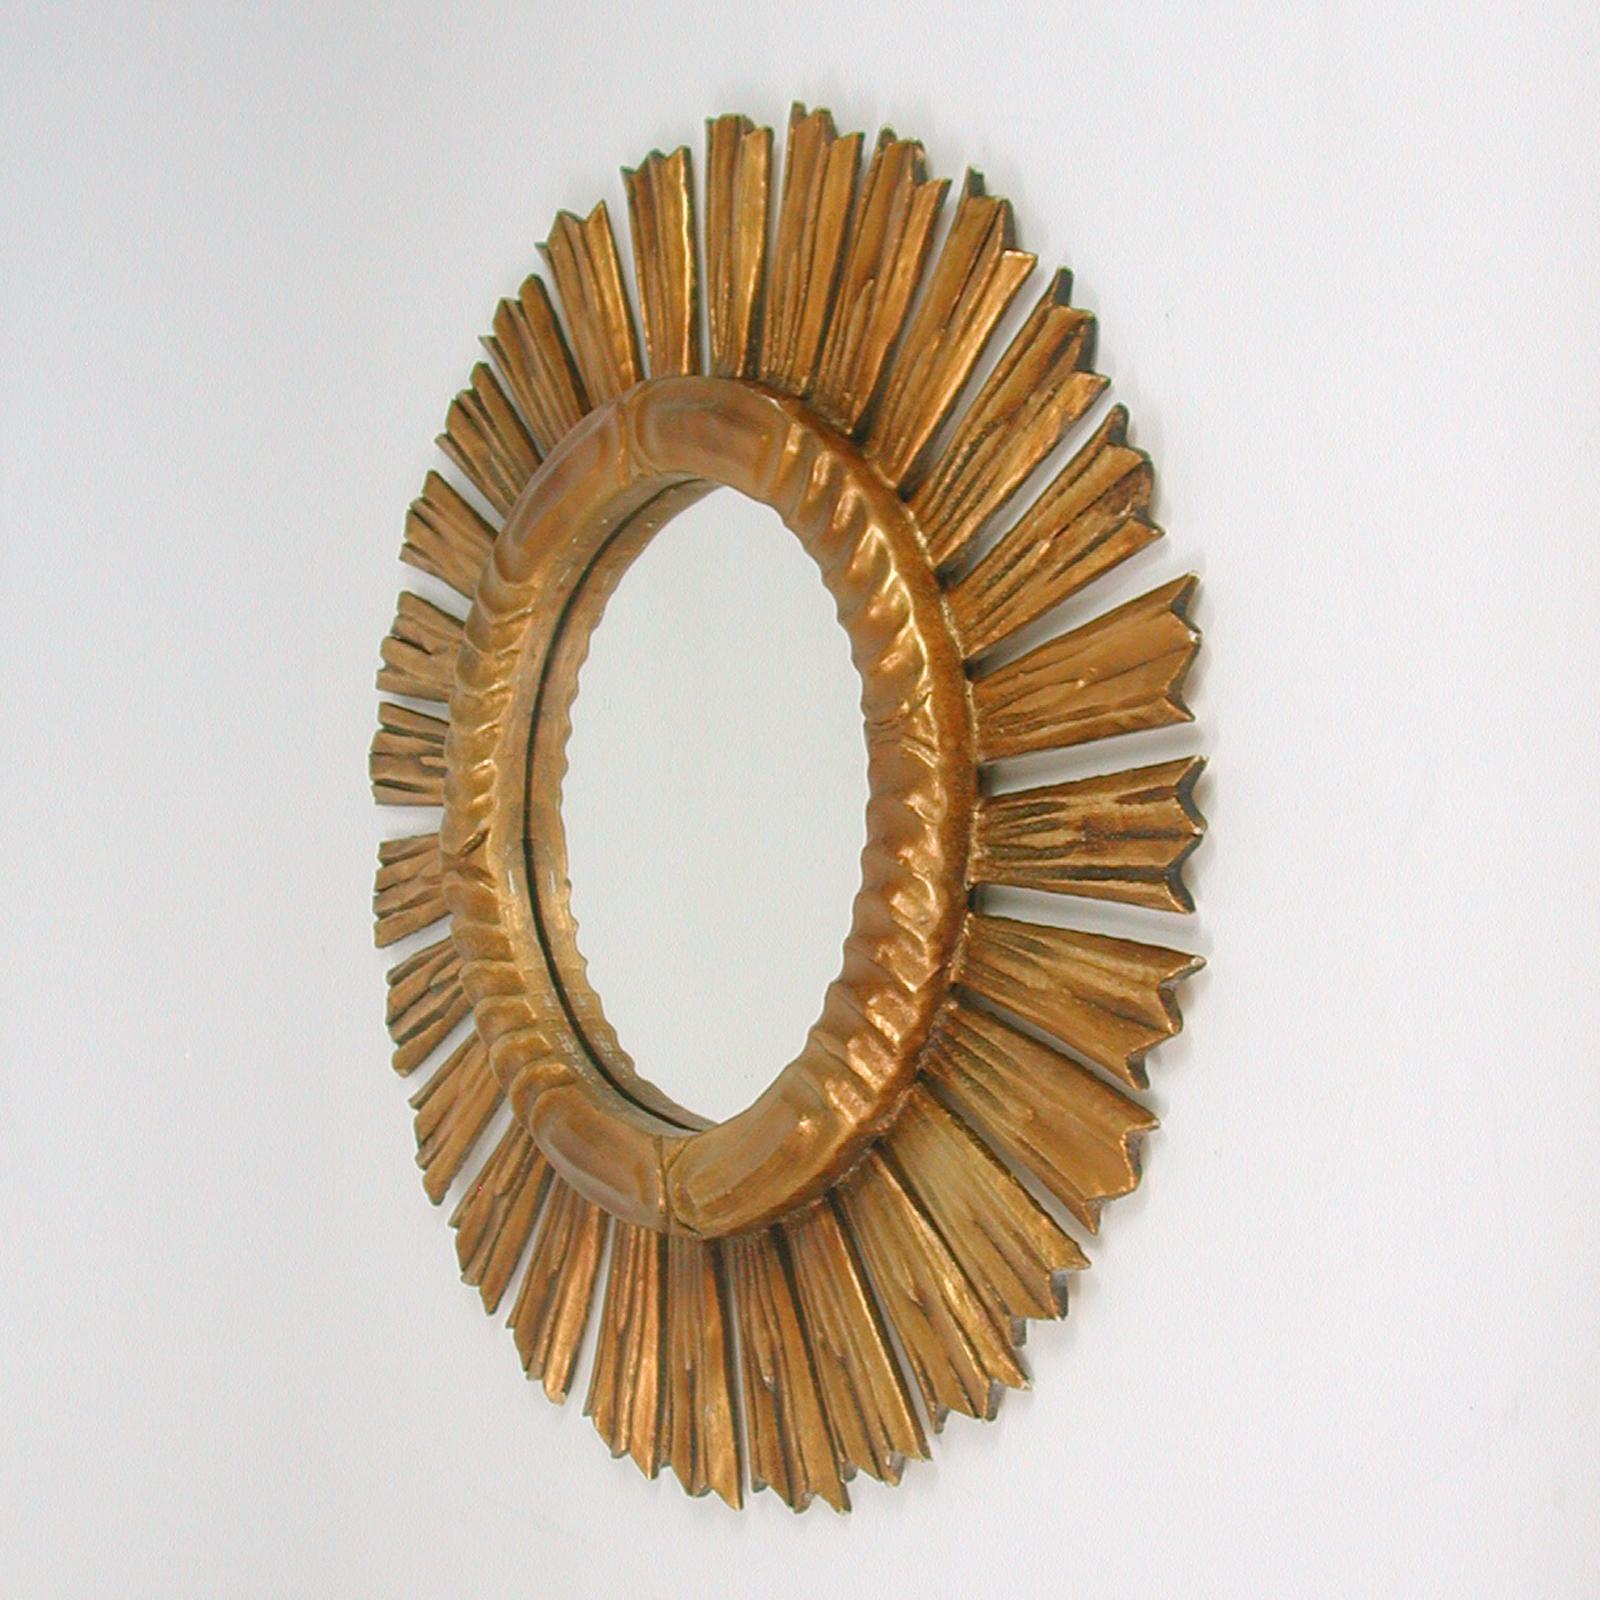 20th Century Spanish Sunburst Carved Giltwood Mirror, 1940s to 1950s For Sale